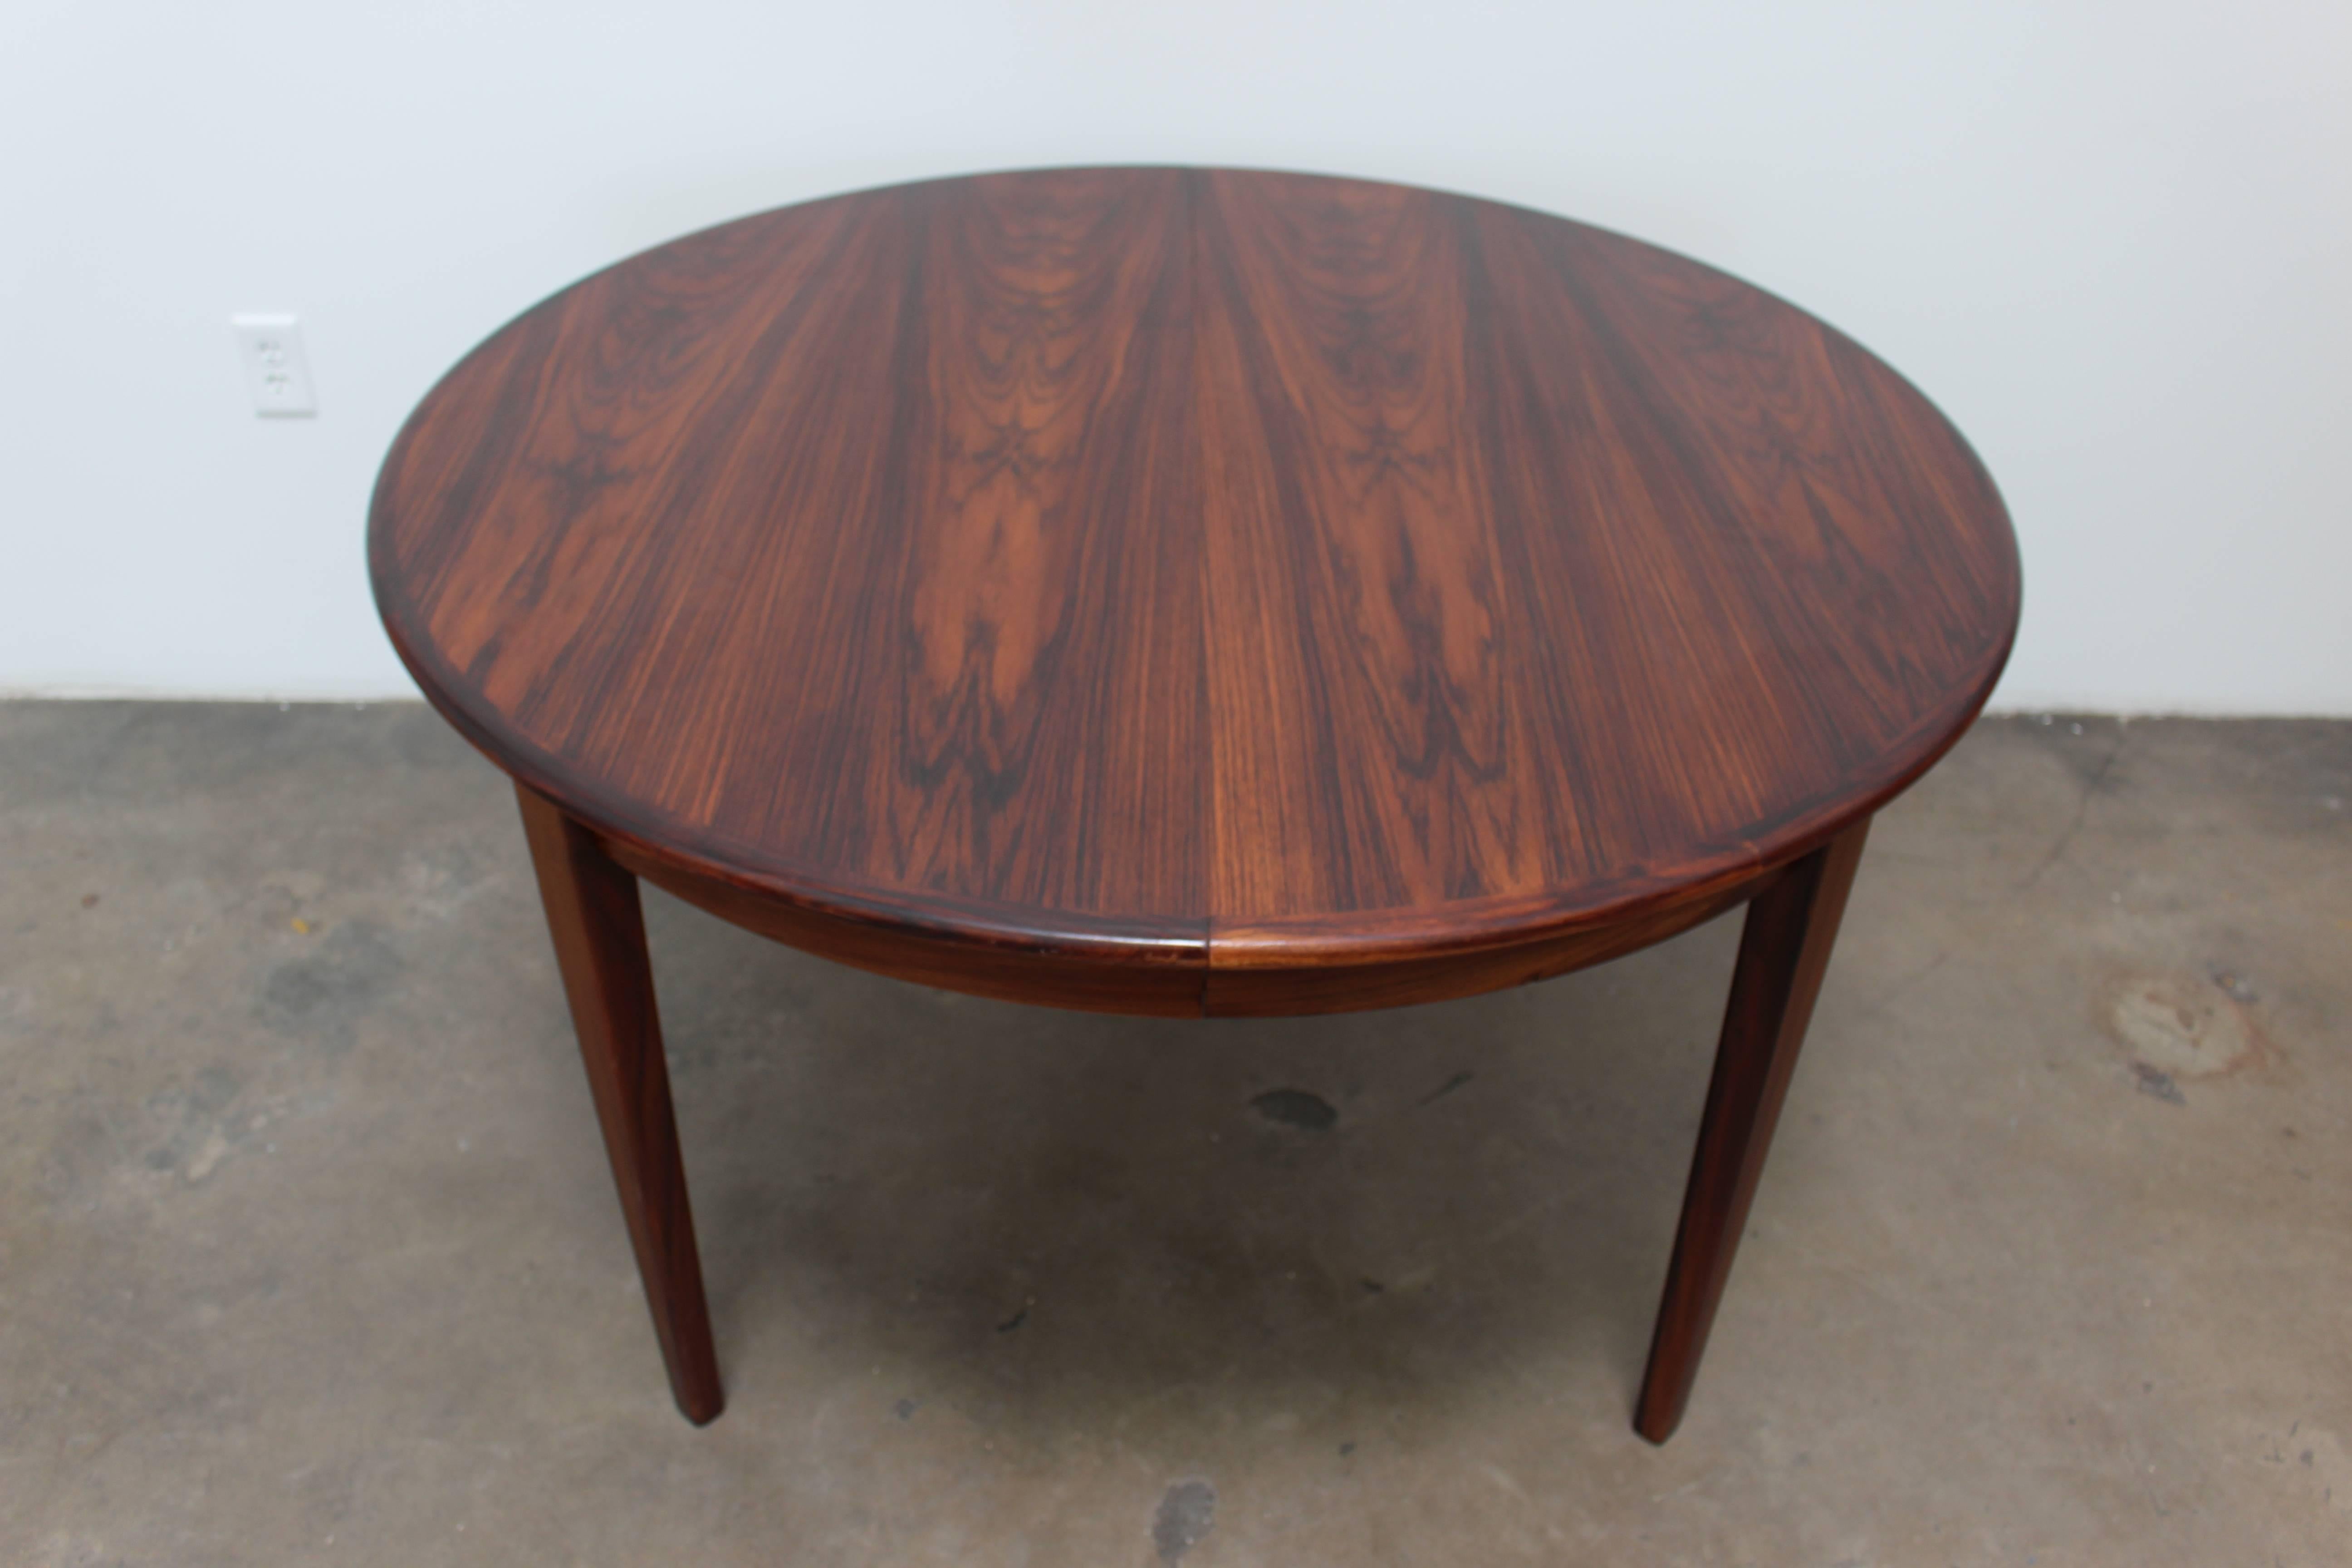 Scandinavian Modern Rosewood Round Dining Table by H. Sign & Sons